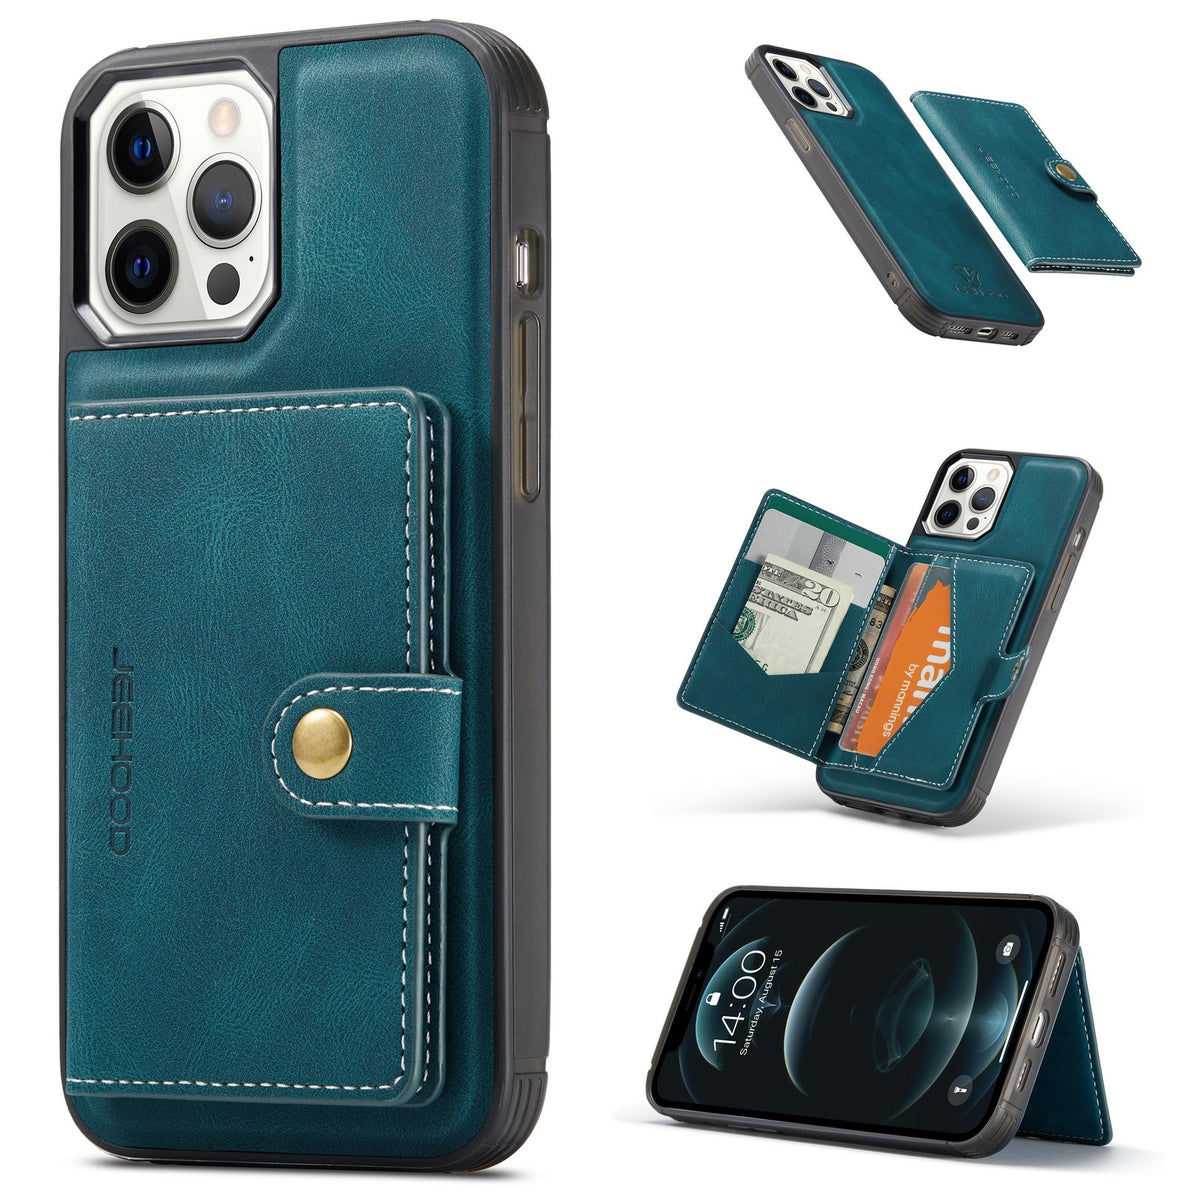 Nordic blue - Astra leather case  high-end handcrafted case for